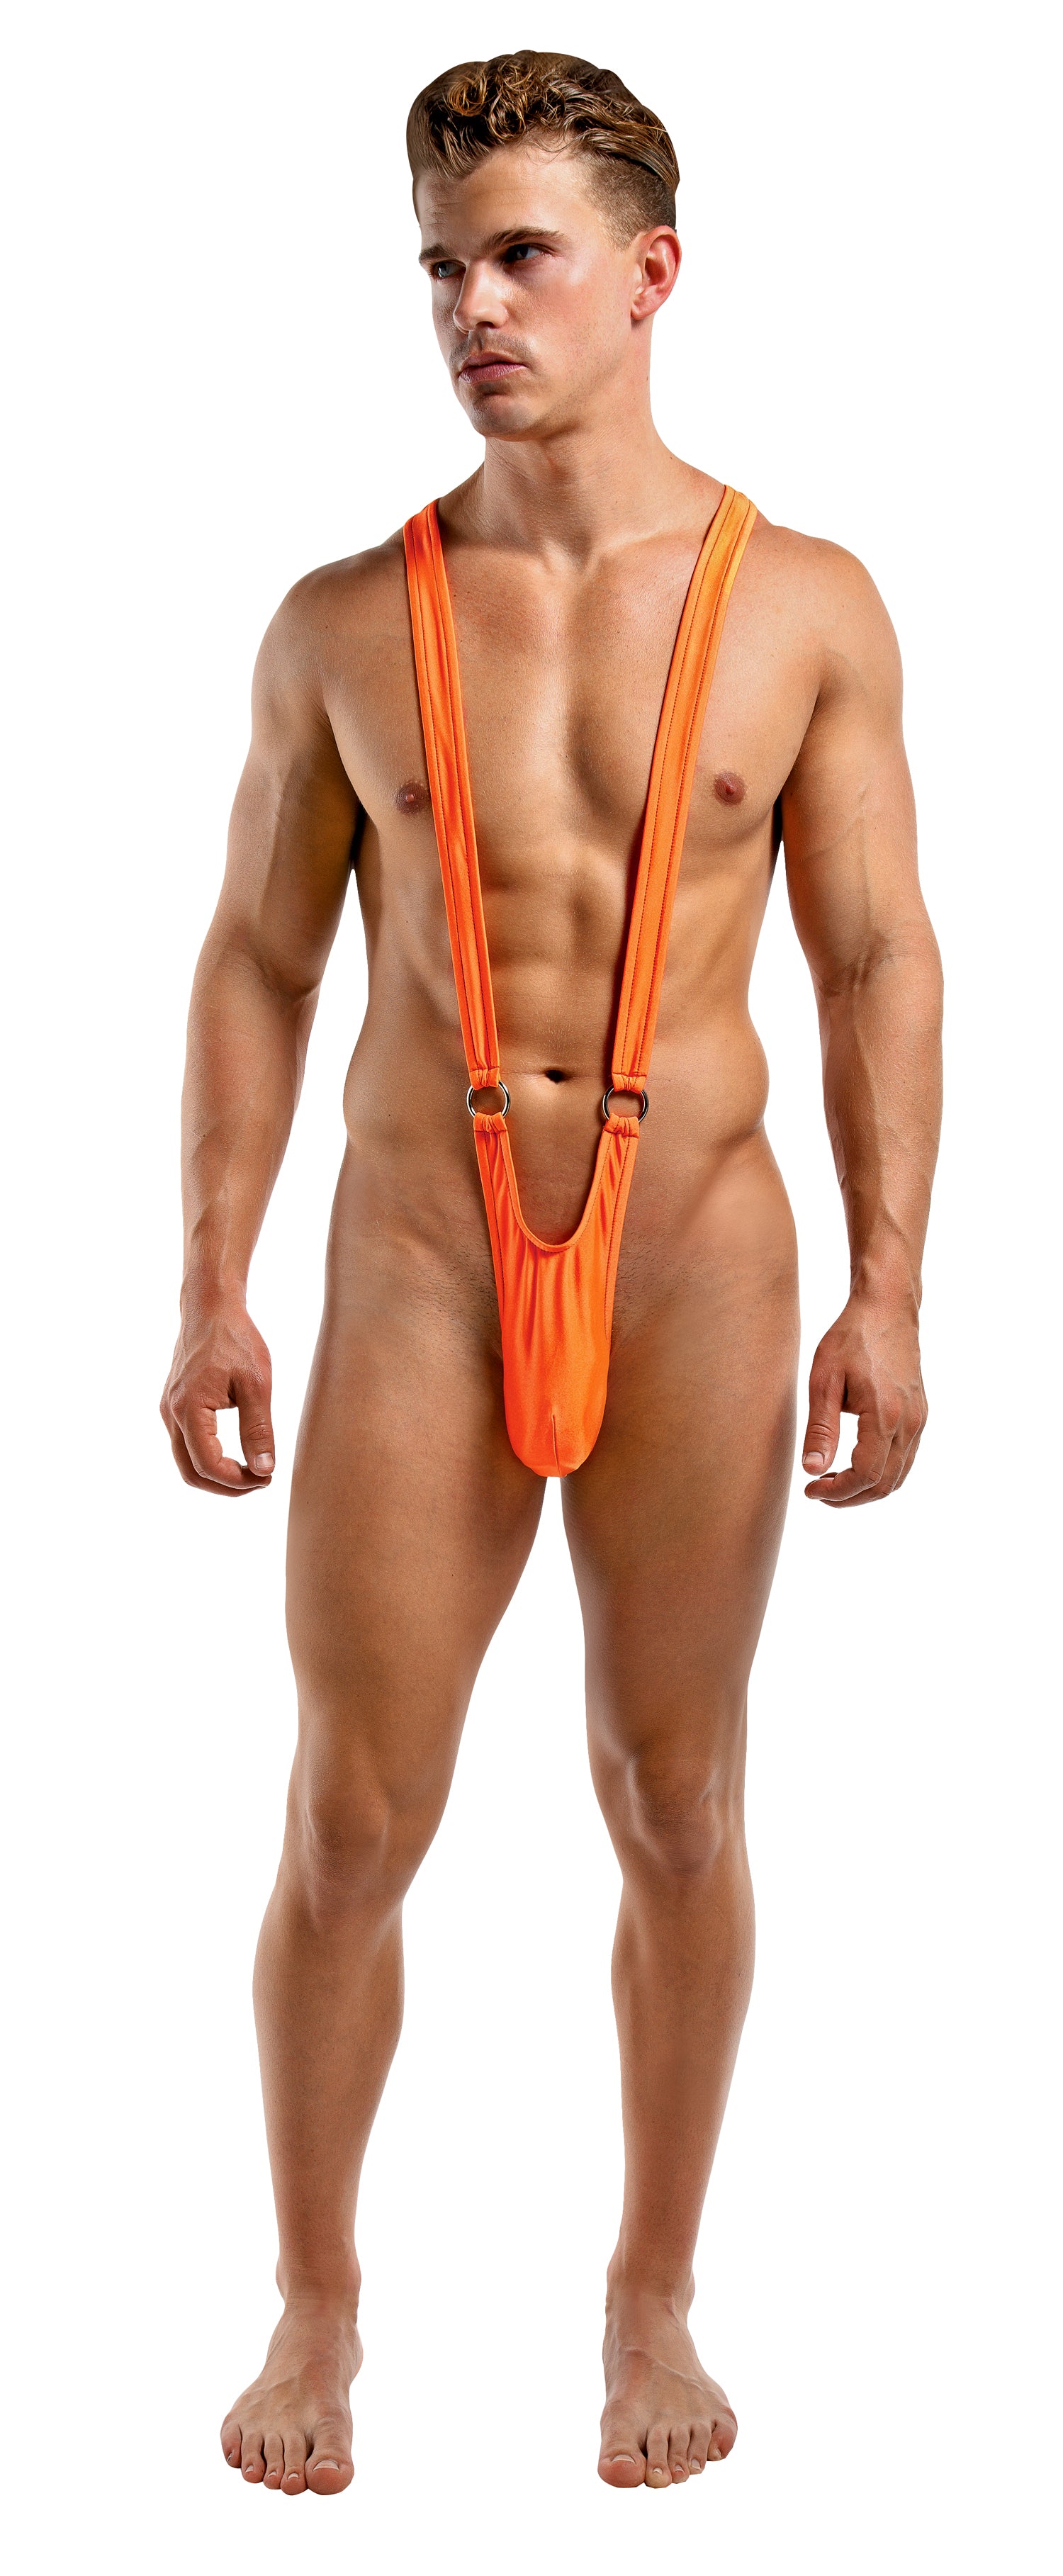 Male Power Sling Front Rings - Just for you desires